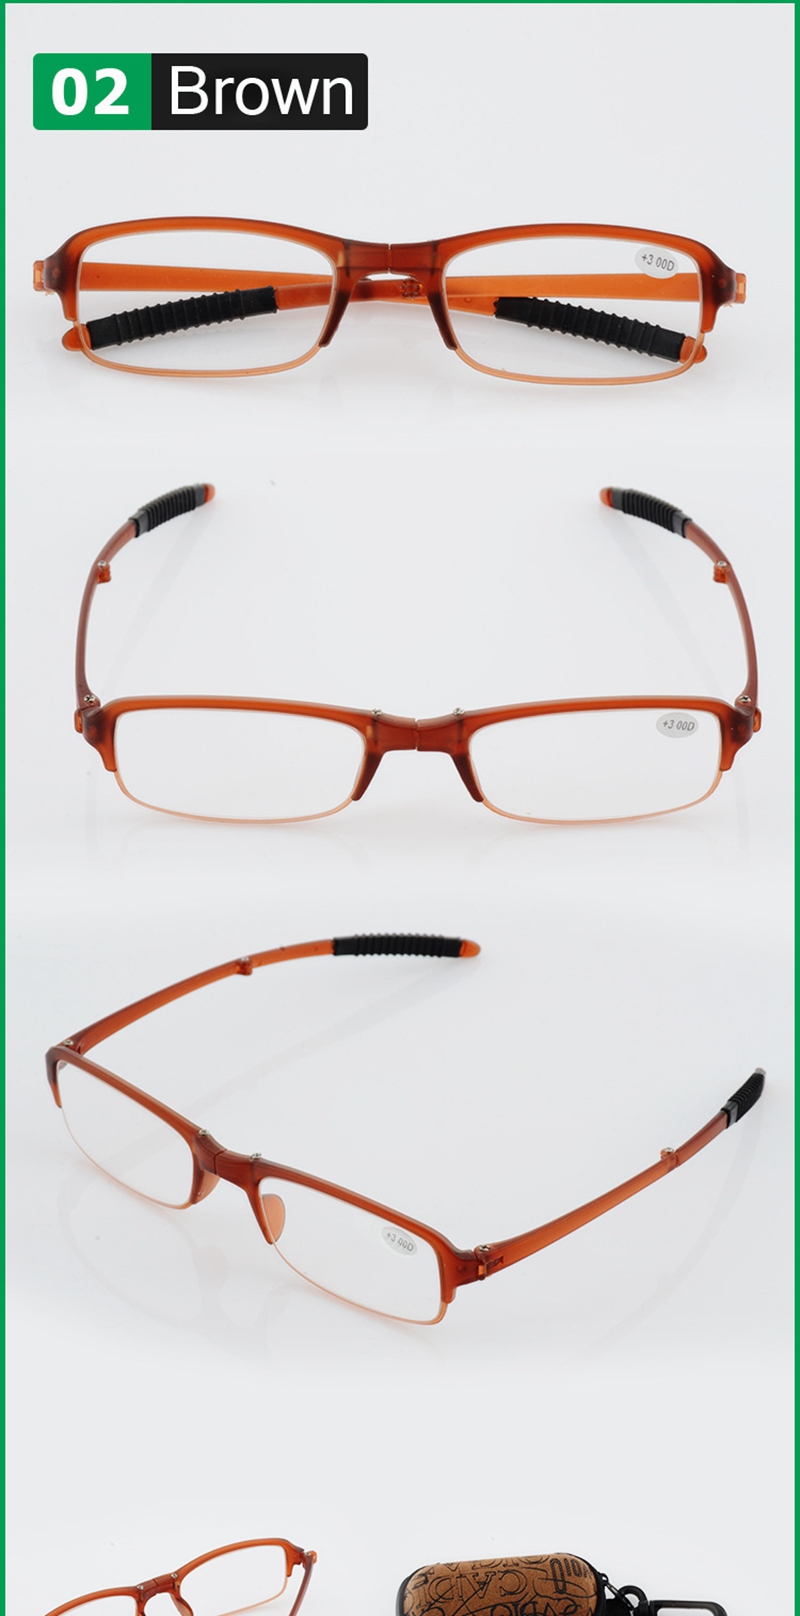 TR90 Soft Light Weight Folding Reading Glasses Magnifying Fatigue Relief 1.0 1.5 2.0 2.5 3.0 3.5 4.0